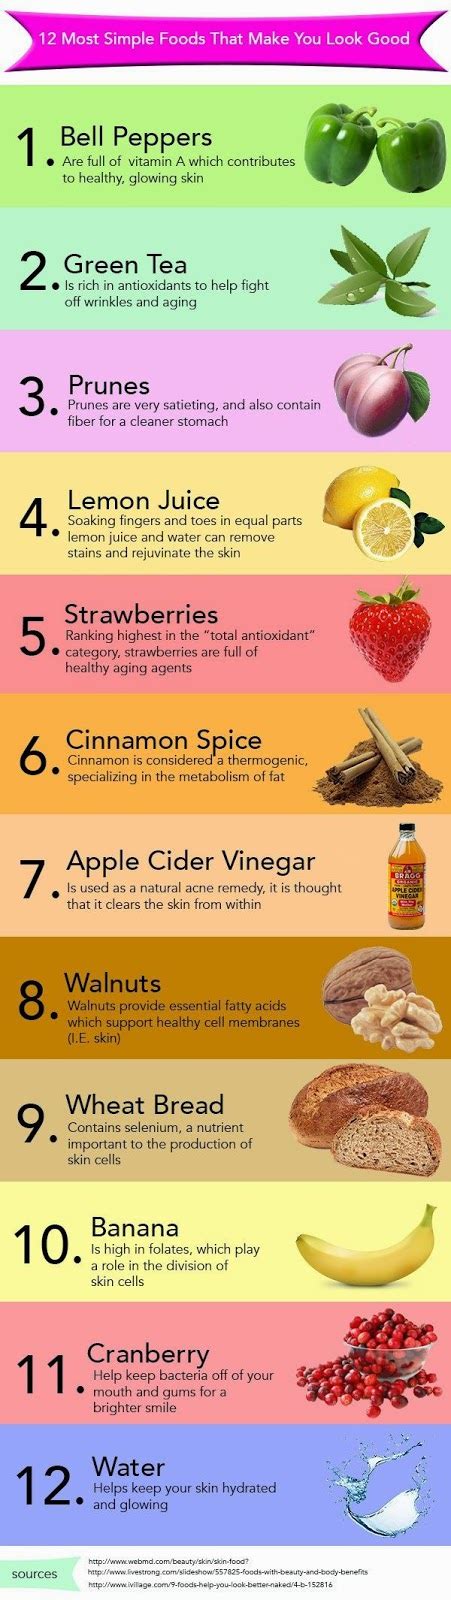 12 Most Simple Food That Make You Look Good More Healthy Tips